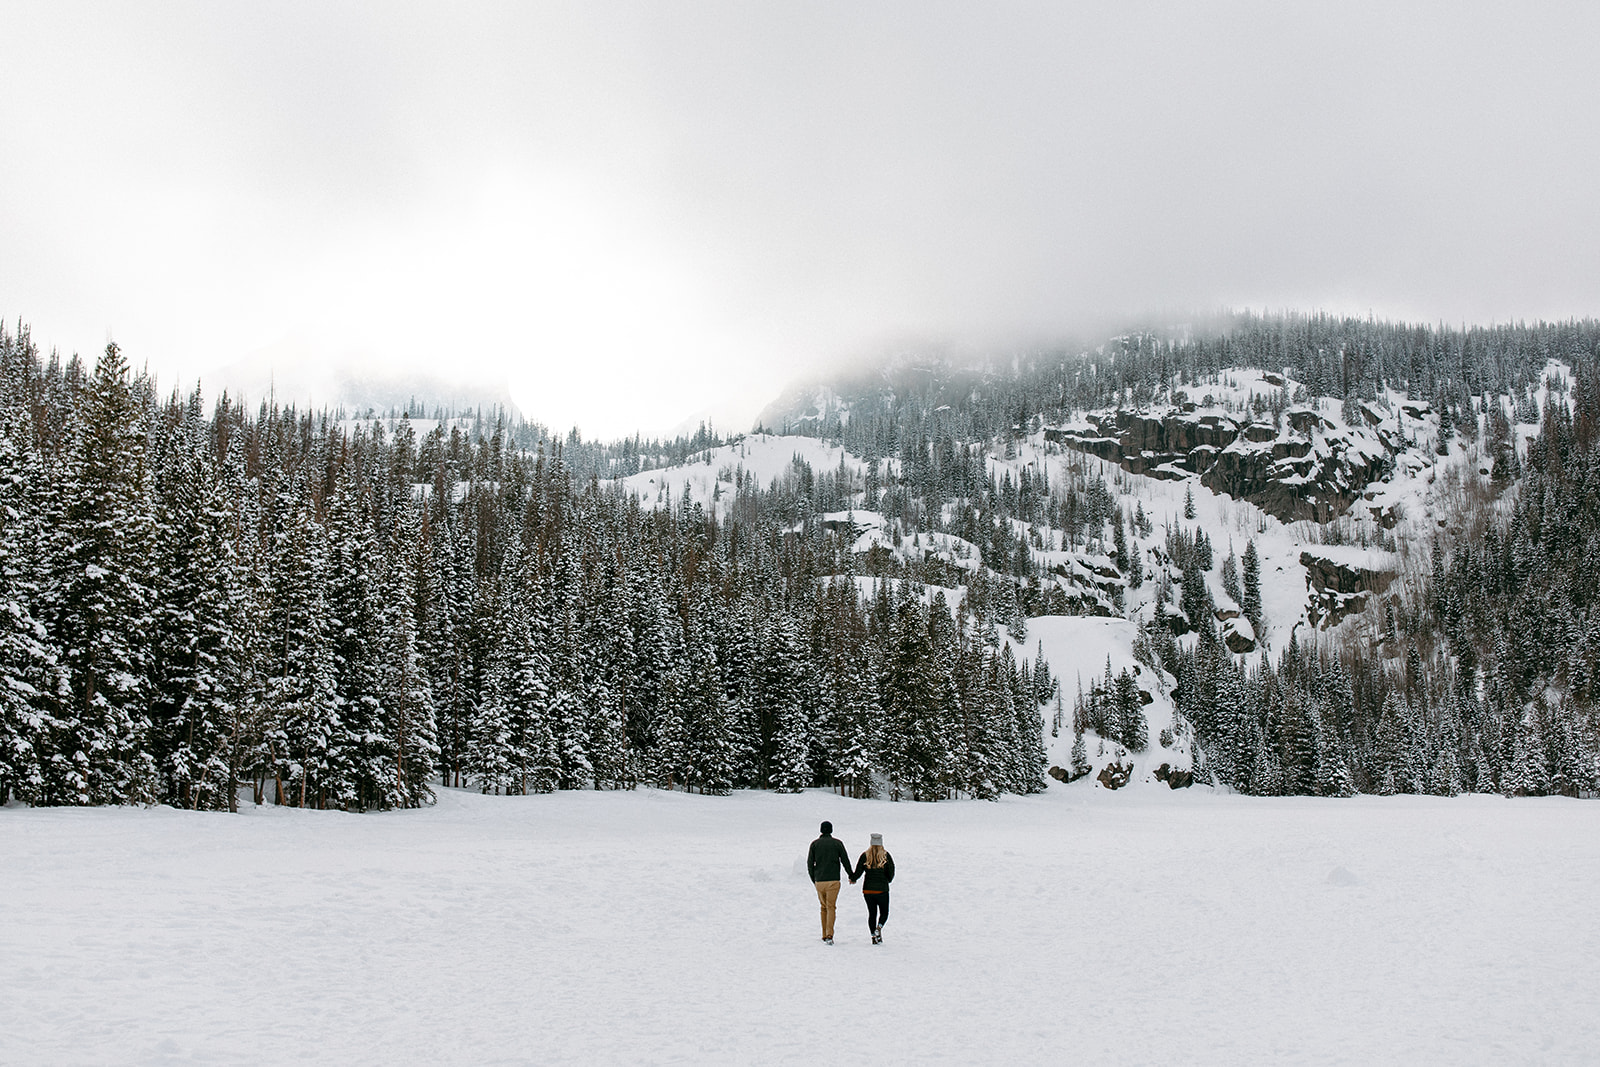 the couple walking in the snow together